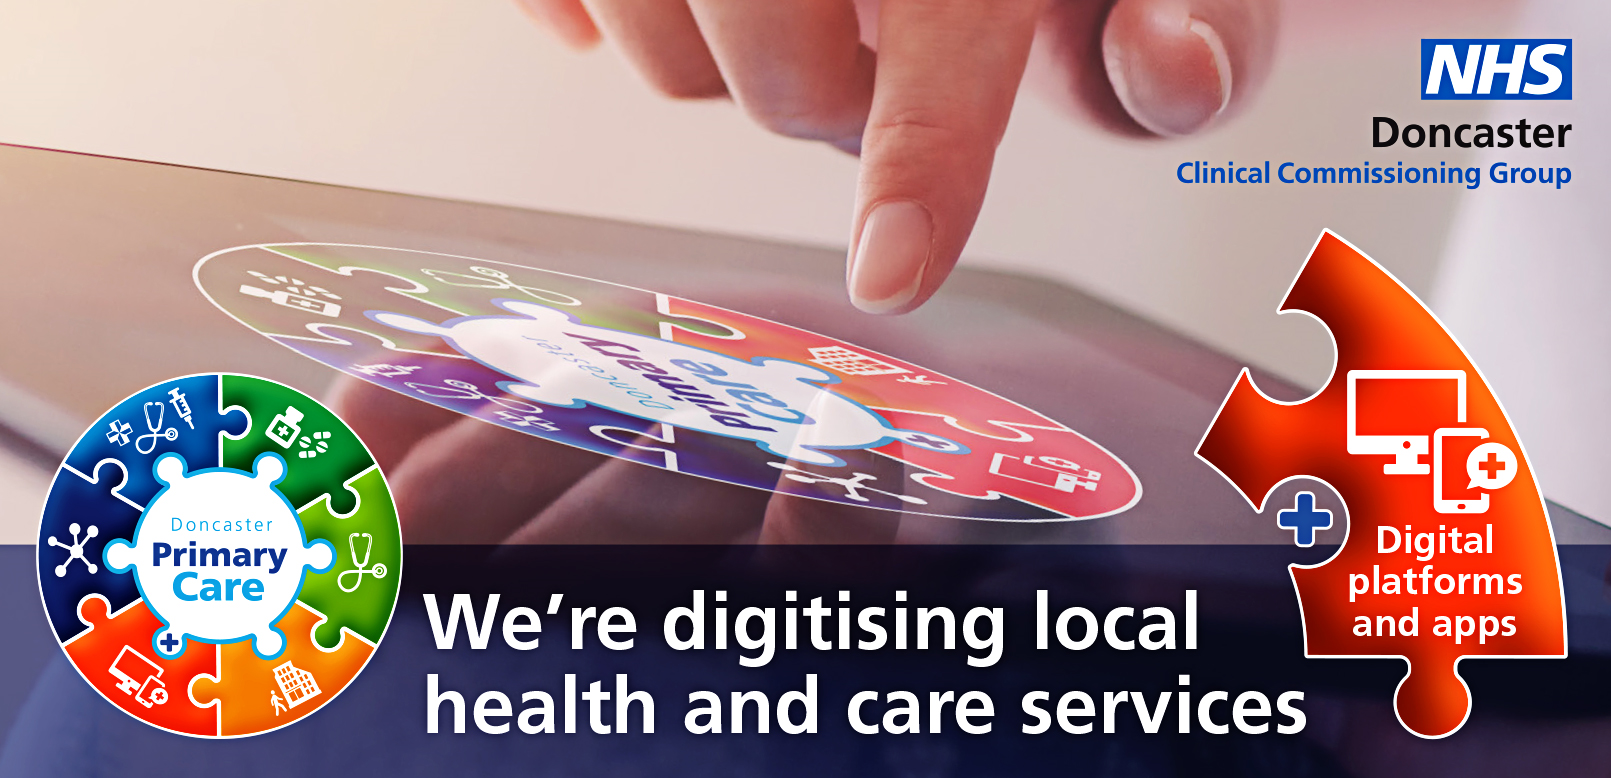 We're digitising local health and care services Doncaster Primary Care Digital Platforms and Apps